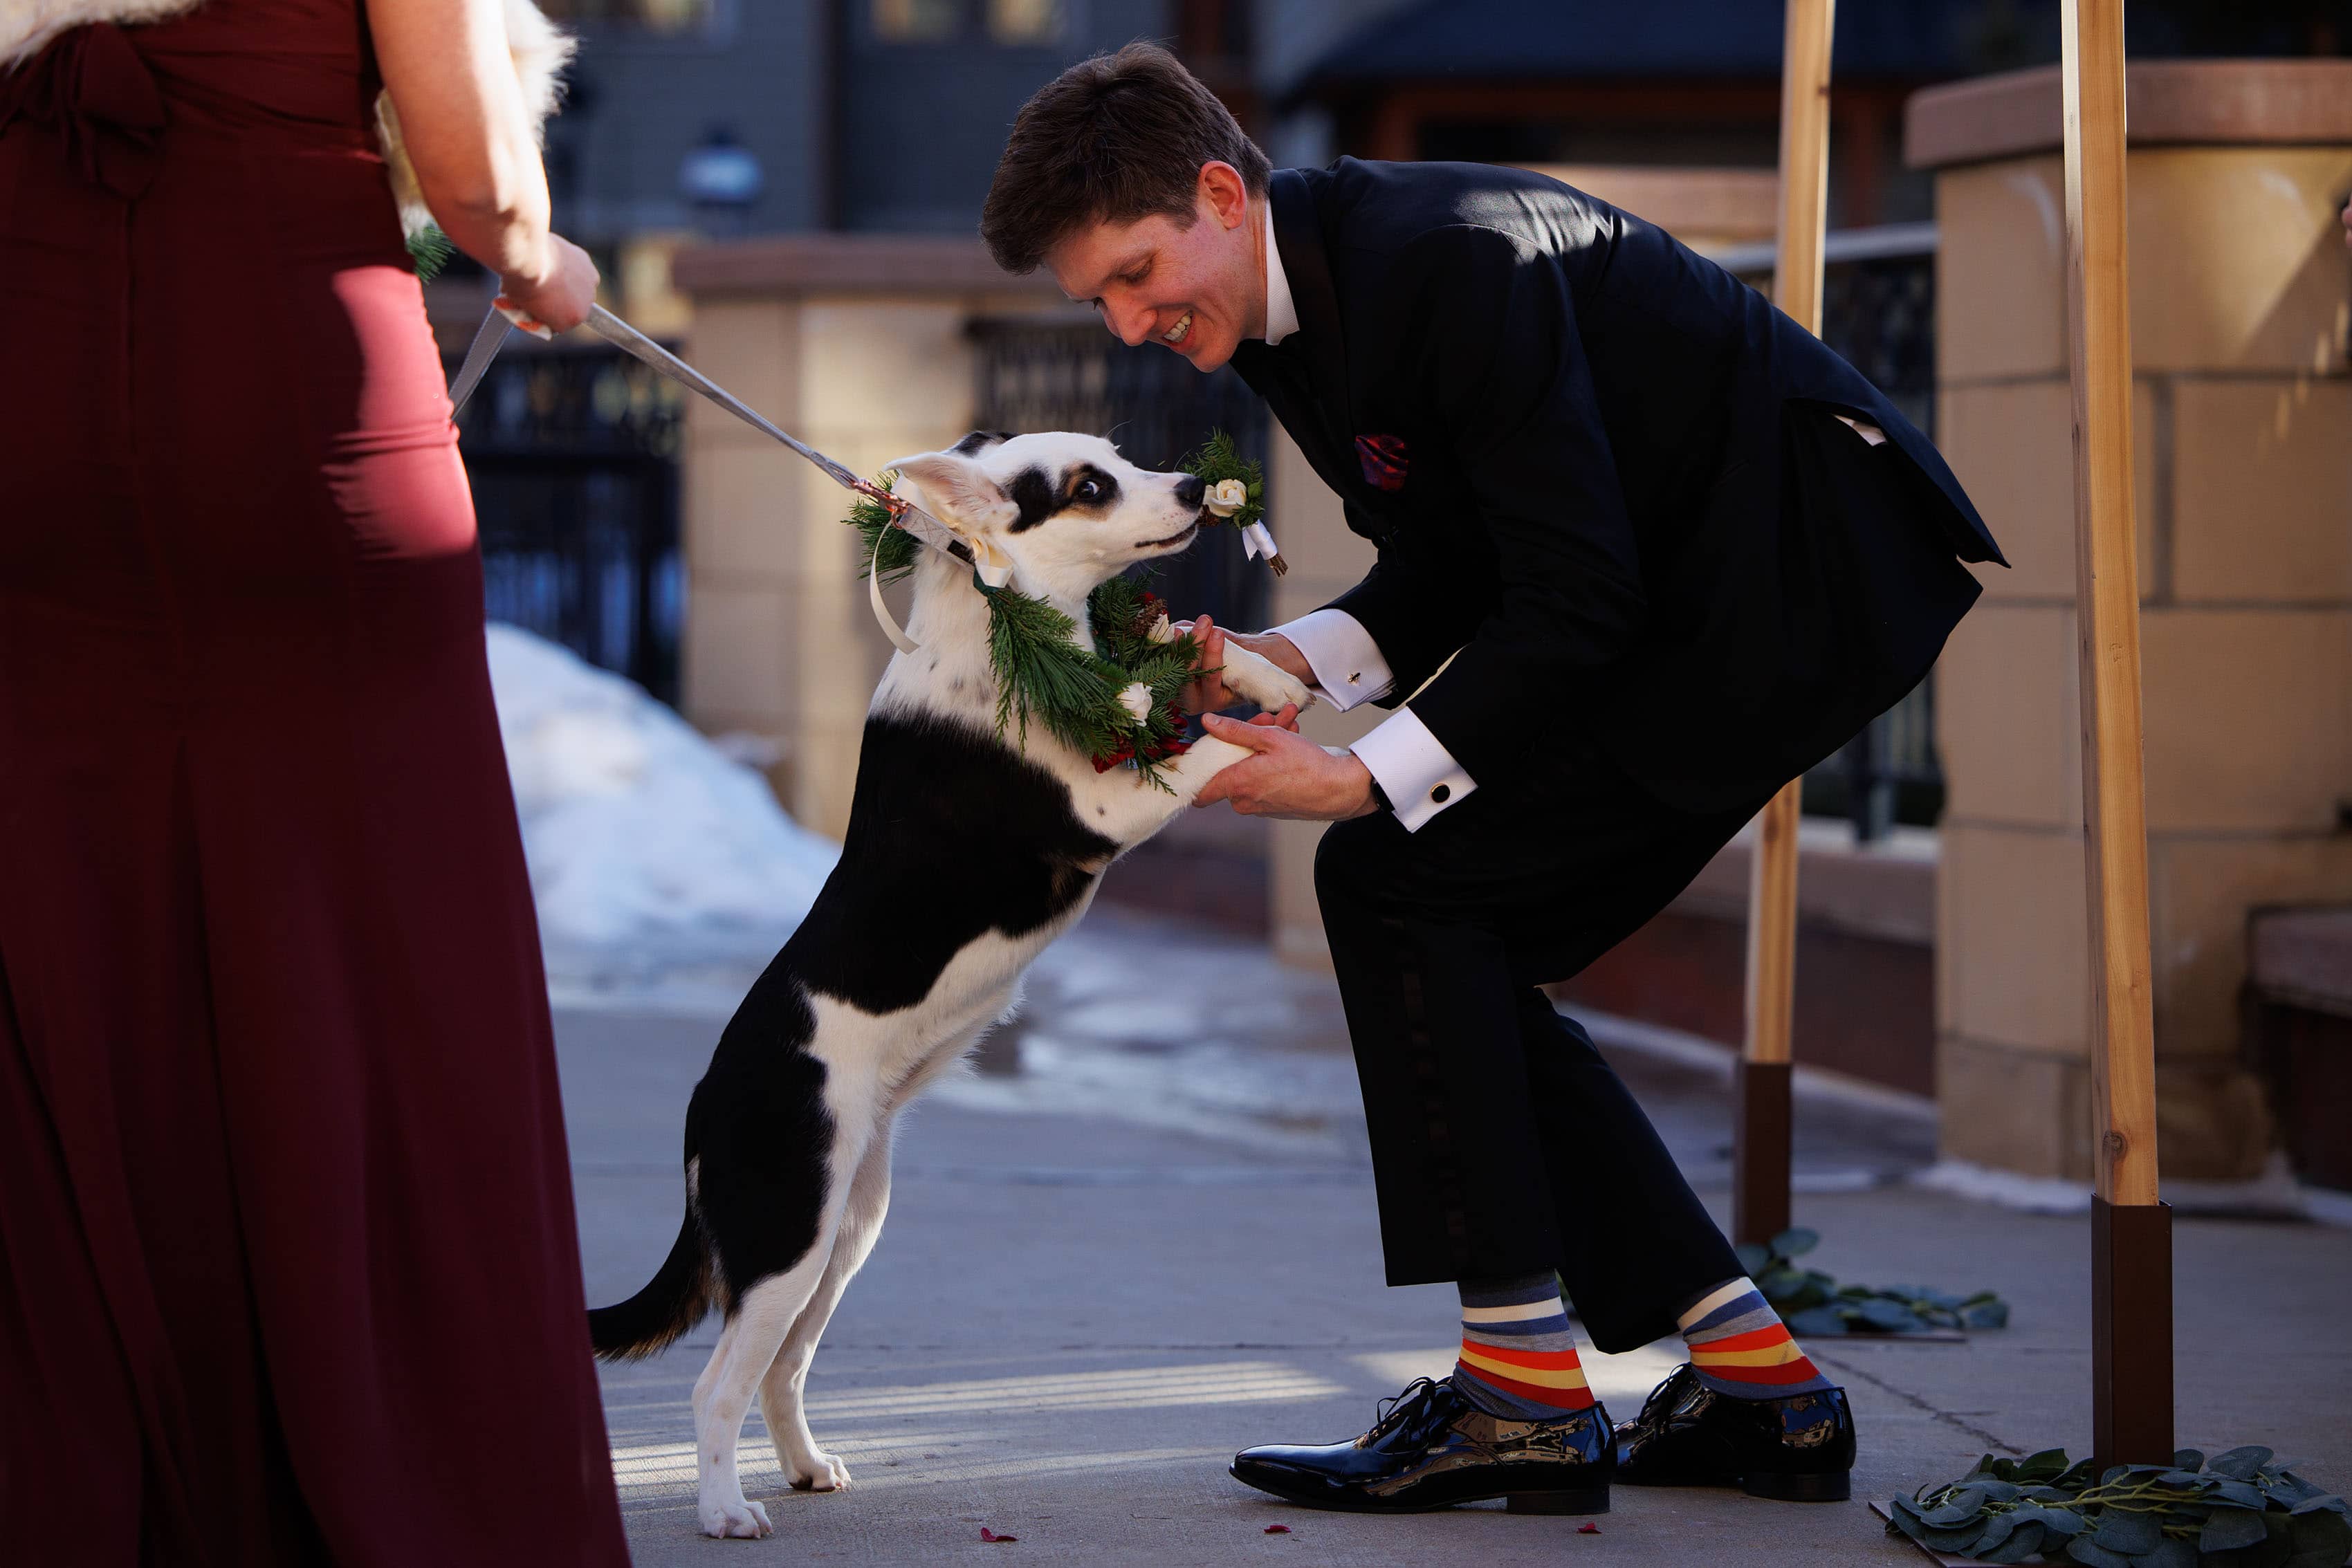 A dog steals the grooms flowers